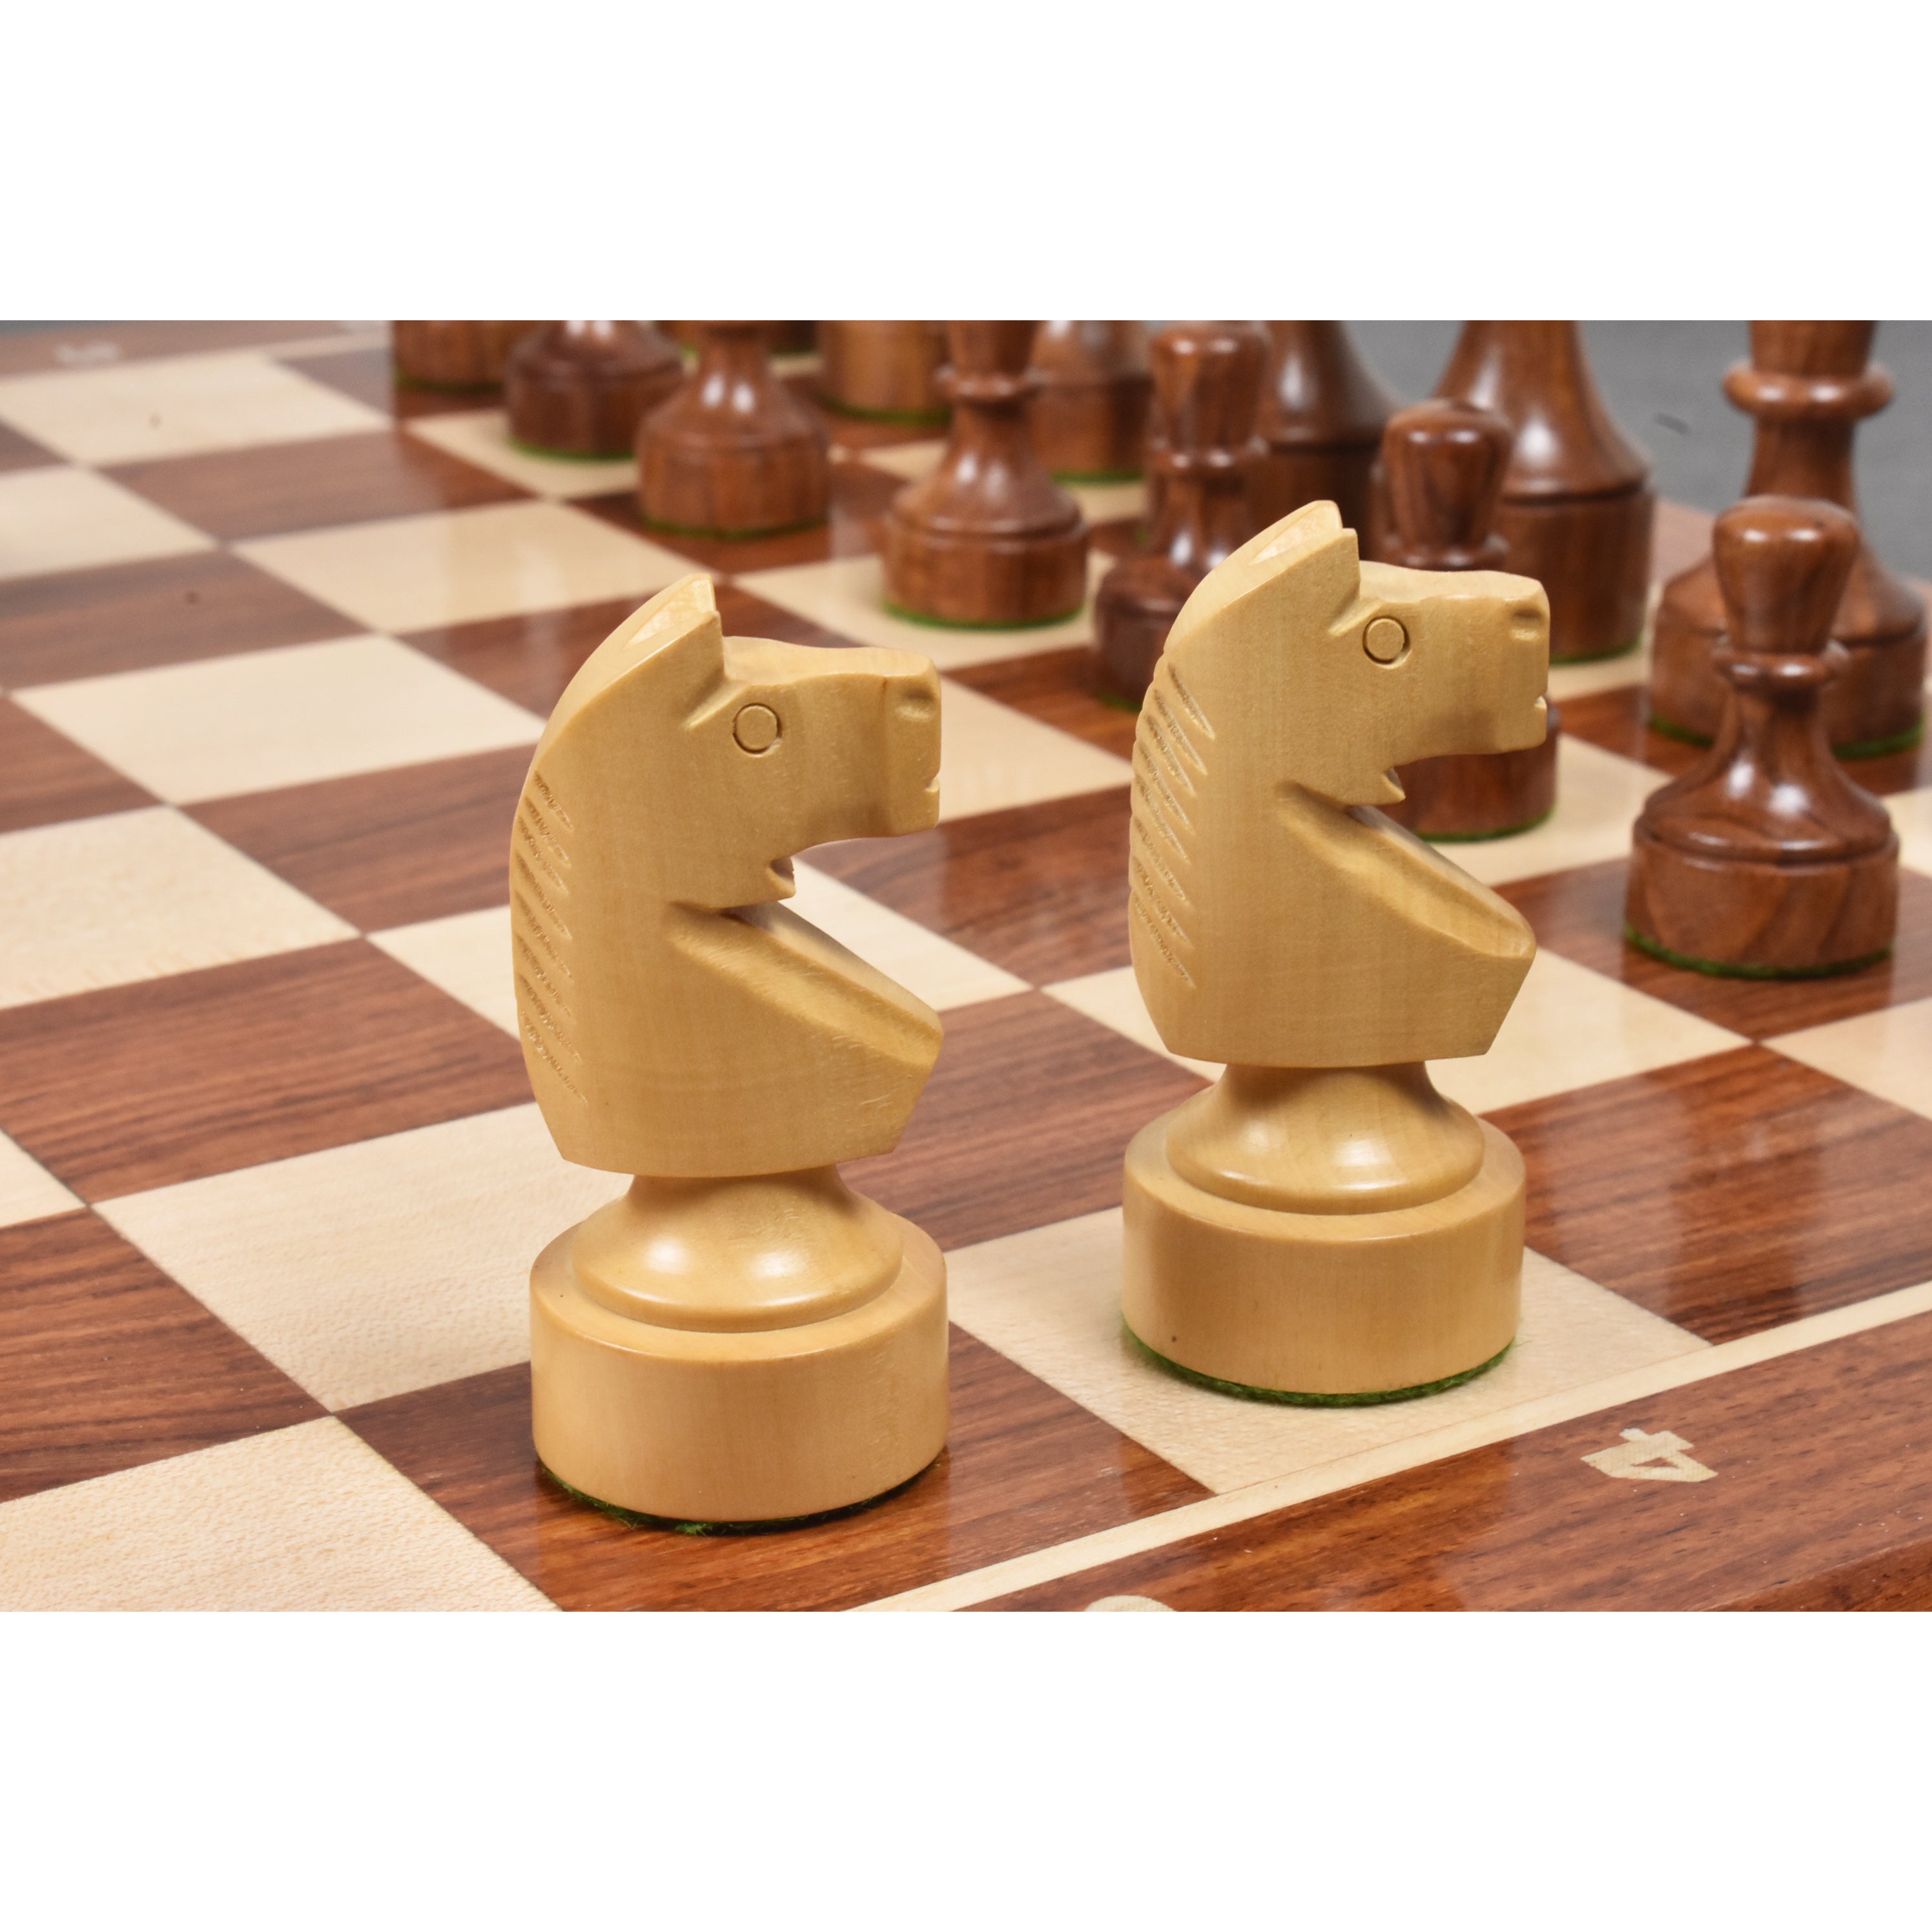 Master of Chess Olympic Wooden Chess Board 30 cm – Tournament Chess Game –  Handmade Chess Game – Wooden Foldable Chess Game – Chess Games for Children